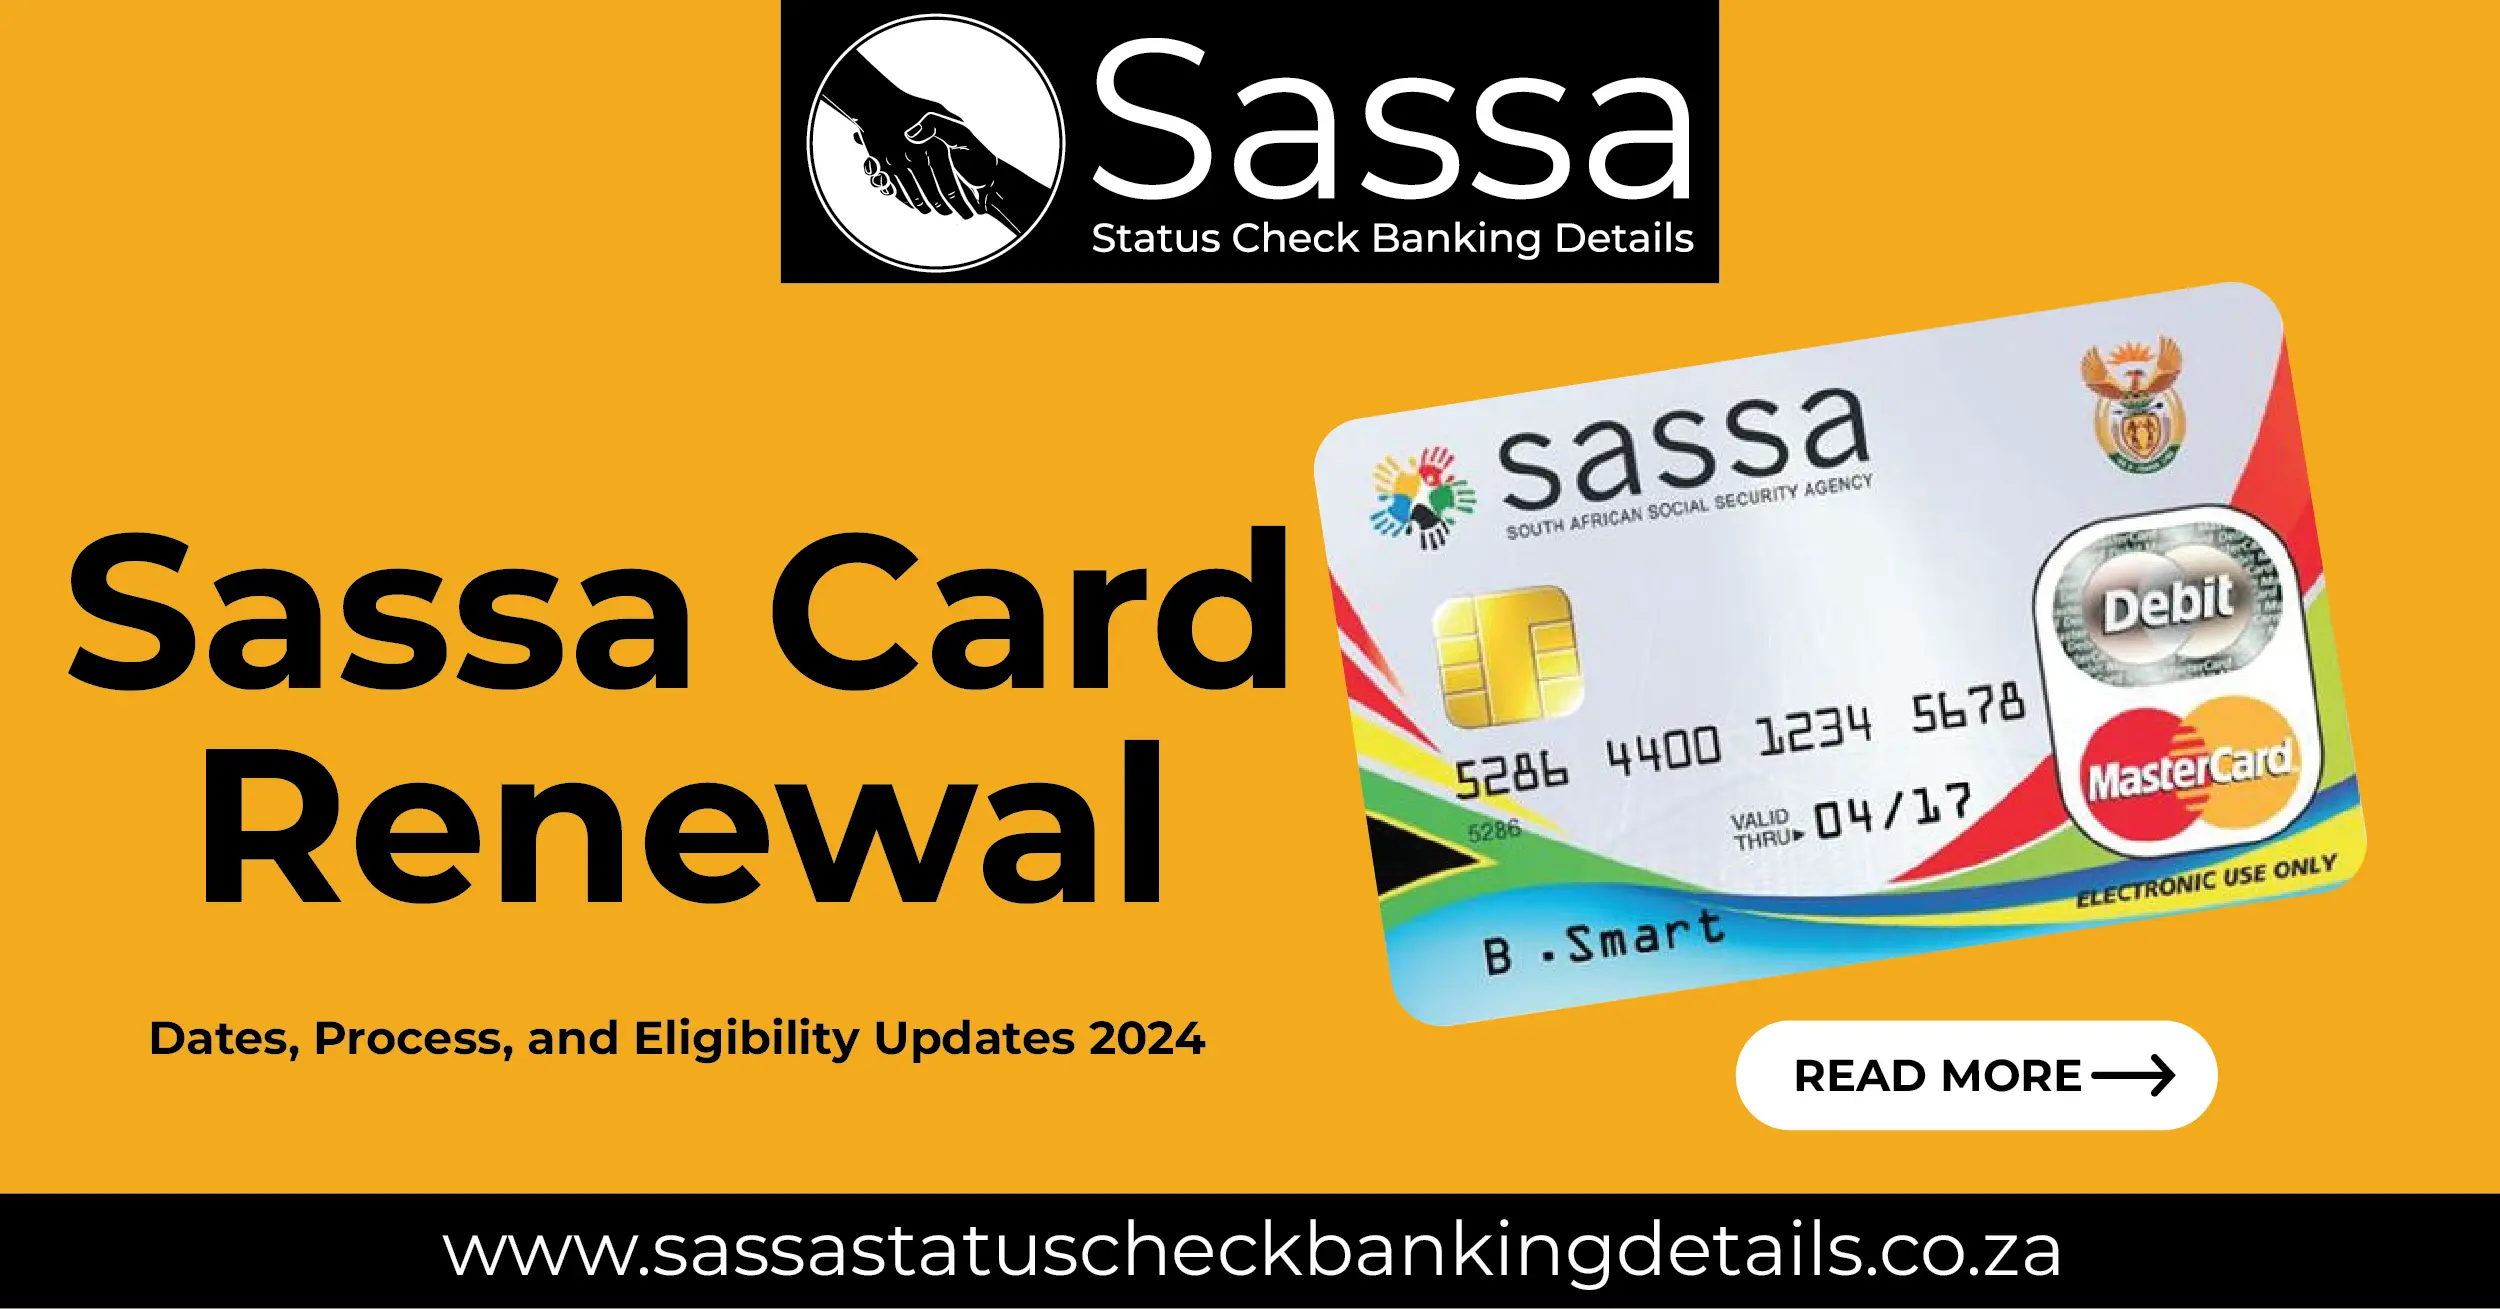 Sassa Card Renewal: Dates, Process, and Eligibility Updates 2024